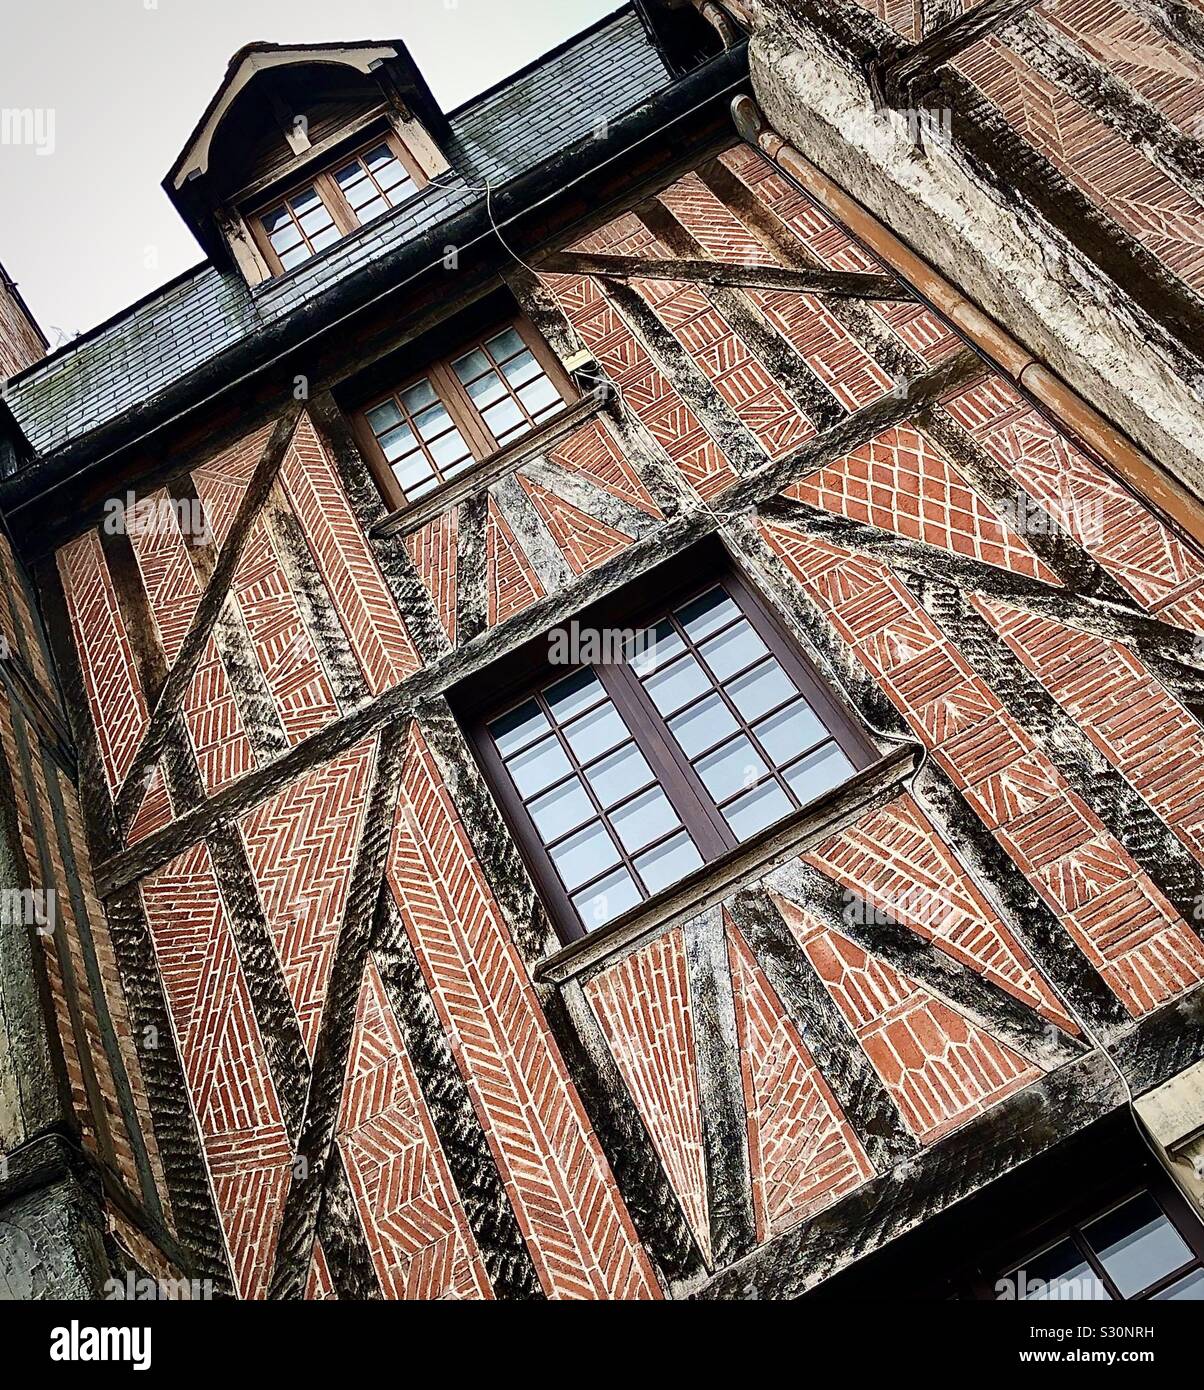 Decorative brickwork patterns on facade of medieval half-timbered 15th century house in Place Plumereau, Tours, central France. Stock Photo